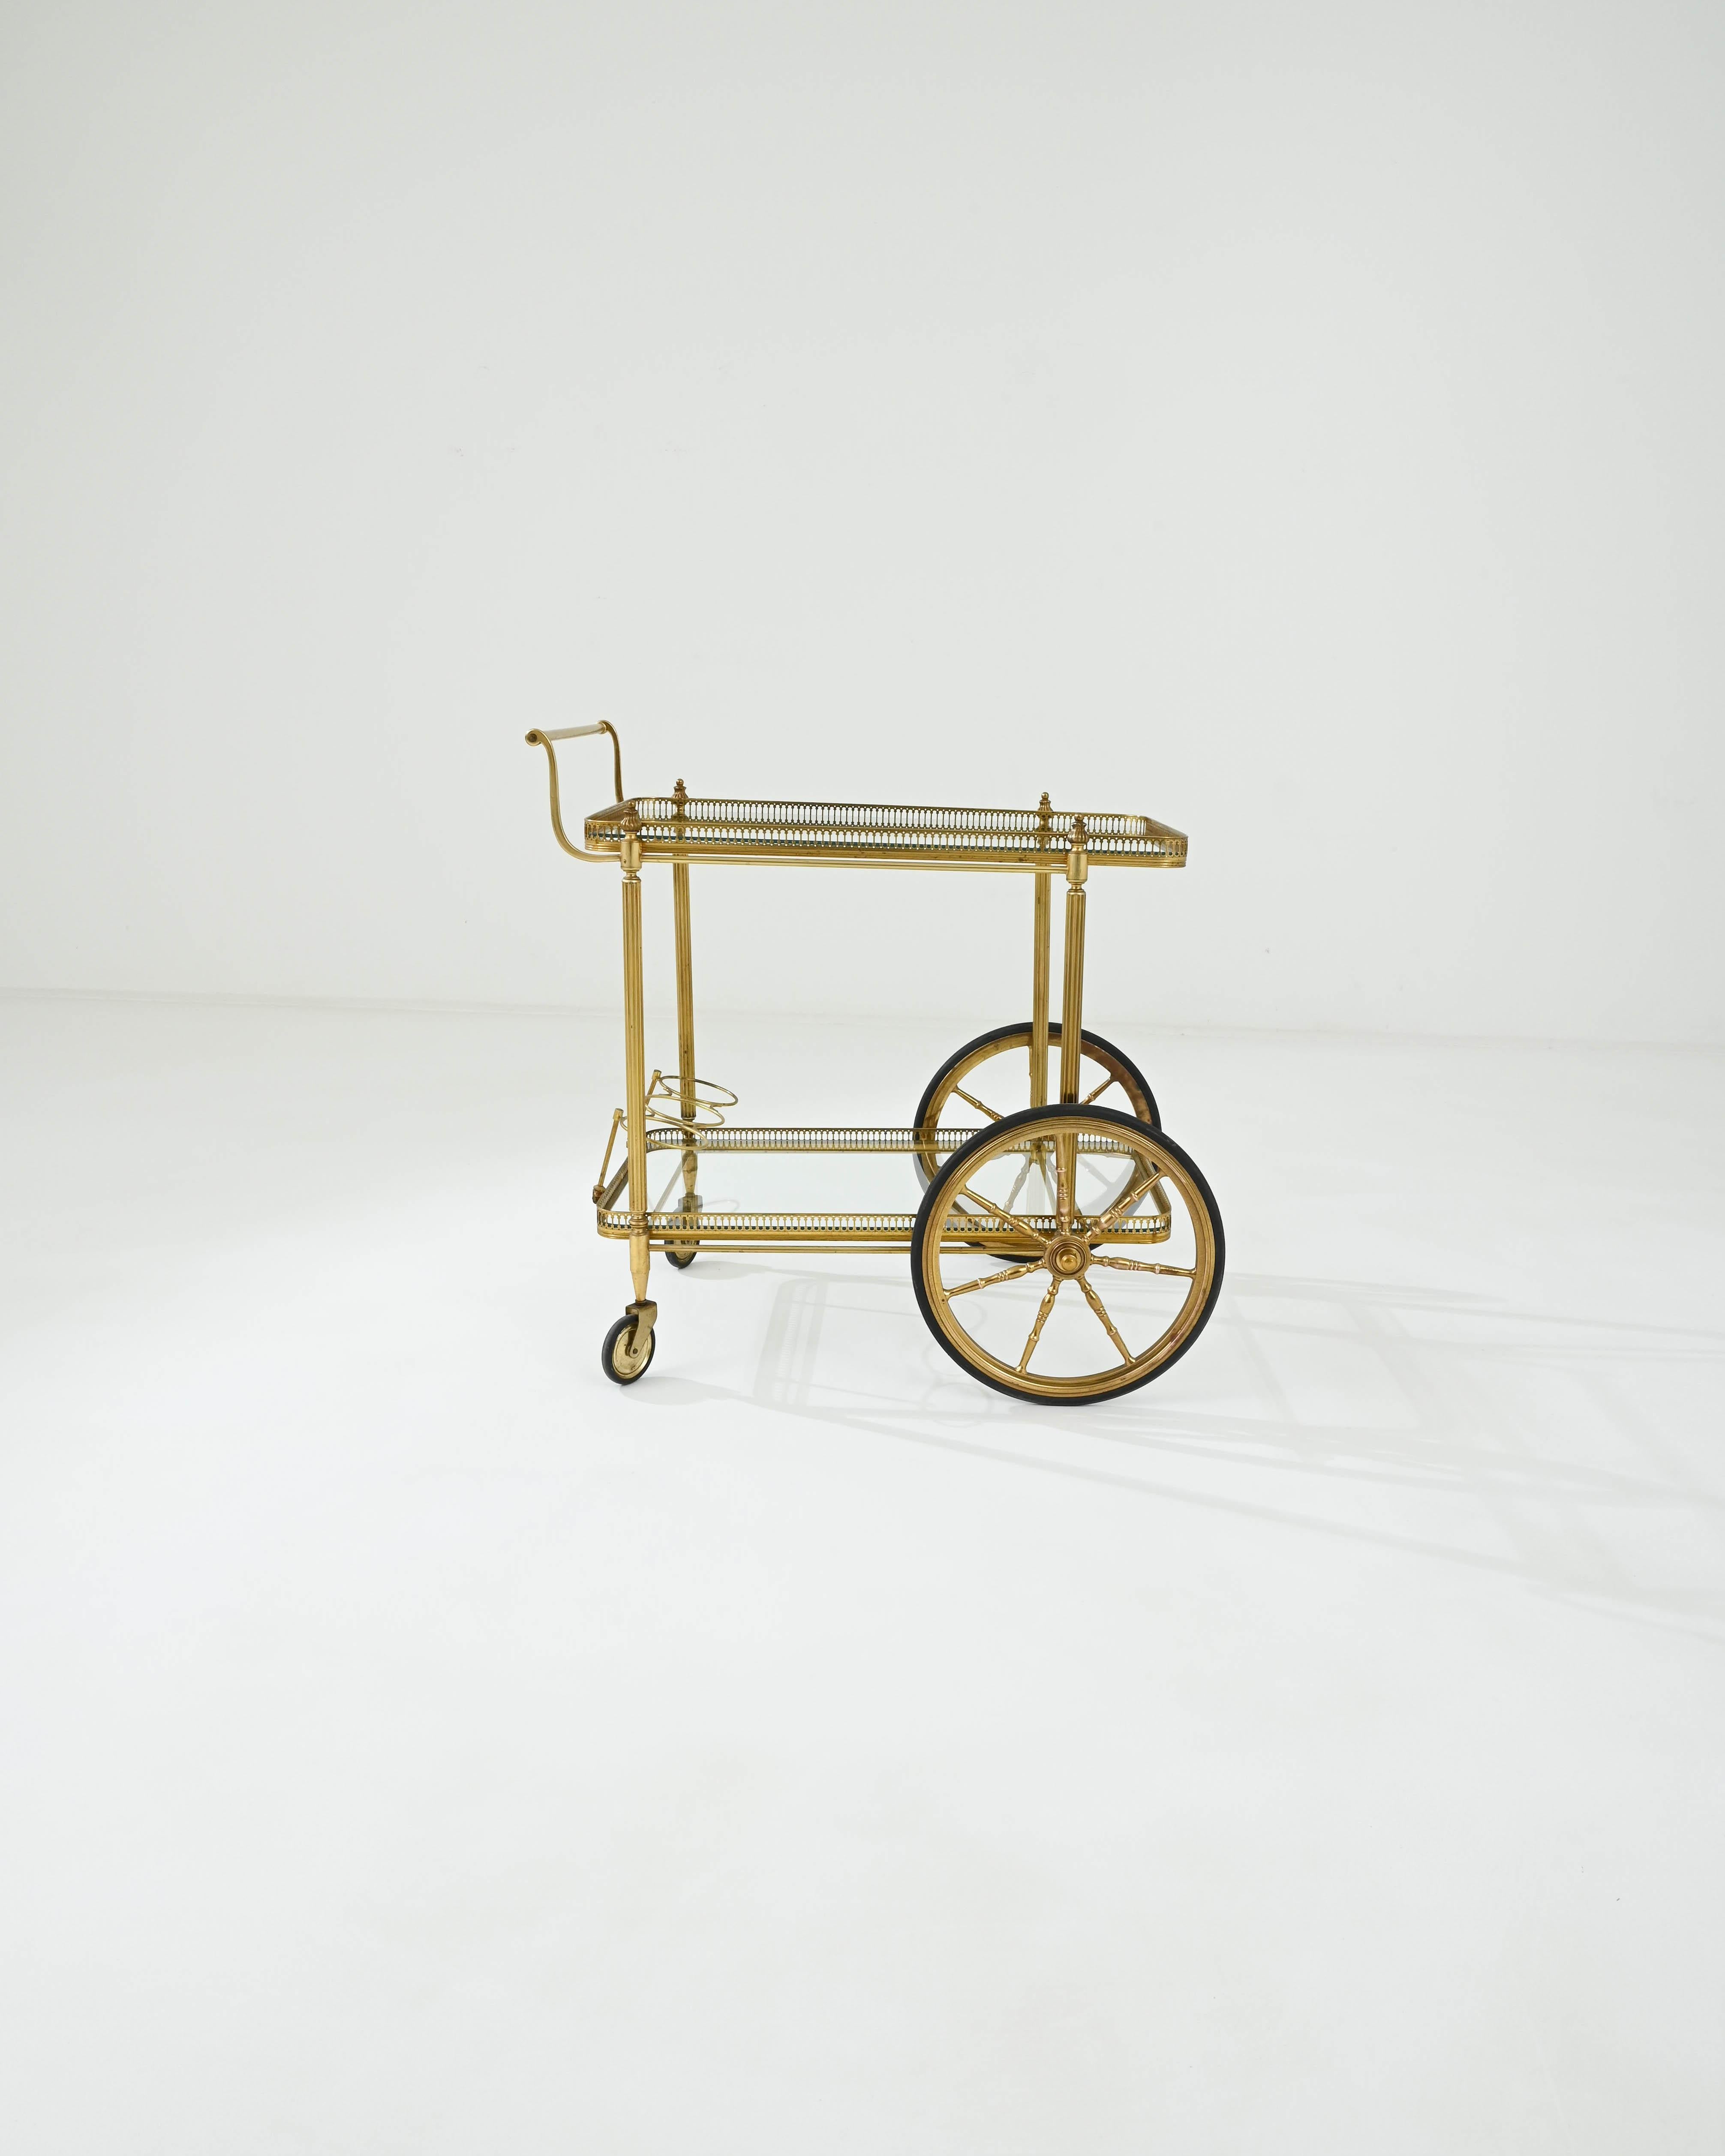 A brass bar cart created in 20th century France. Created in art deco fashion, this gleaming bar cart shines with a brilliant sense of luxury and opulence. An elegant composition is created by the detailed legs, the intricate small fence that